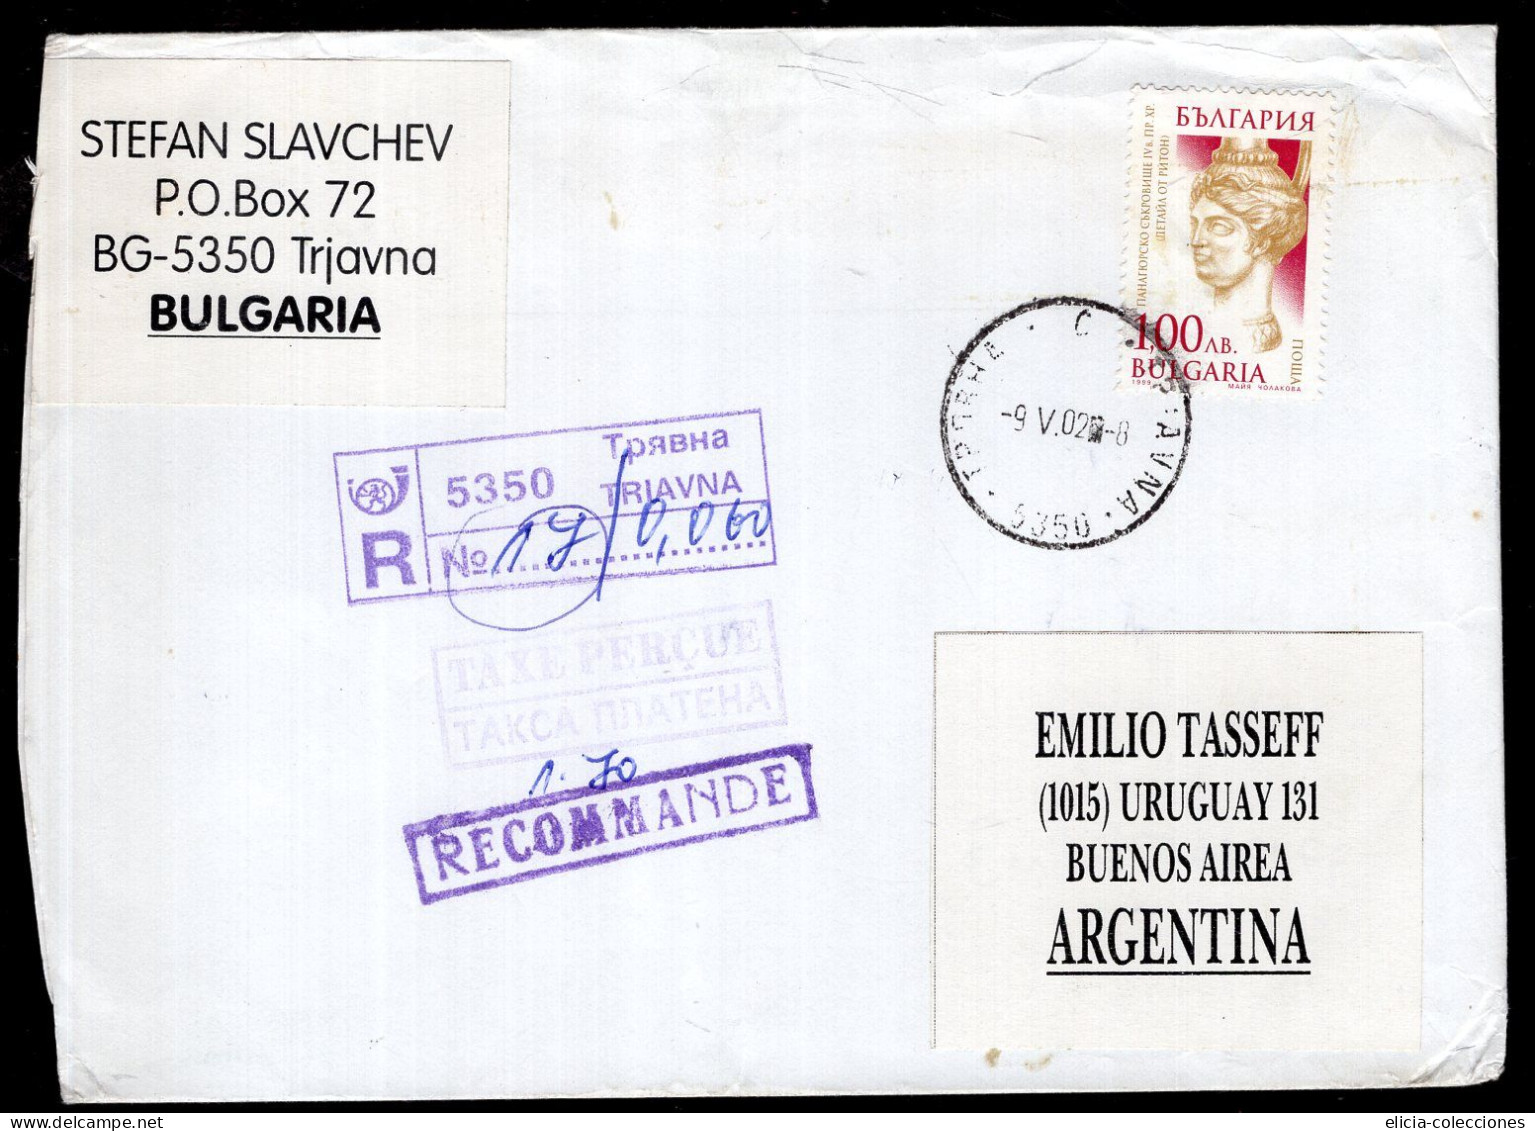 Bulgaria - 2002 - Letter - Sent From Triavna To Argentina - Caja 30 - Covers & Documents